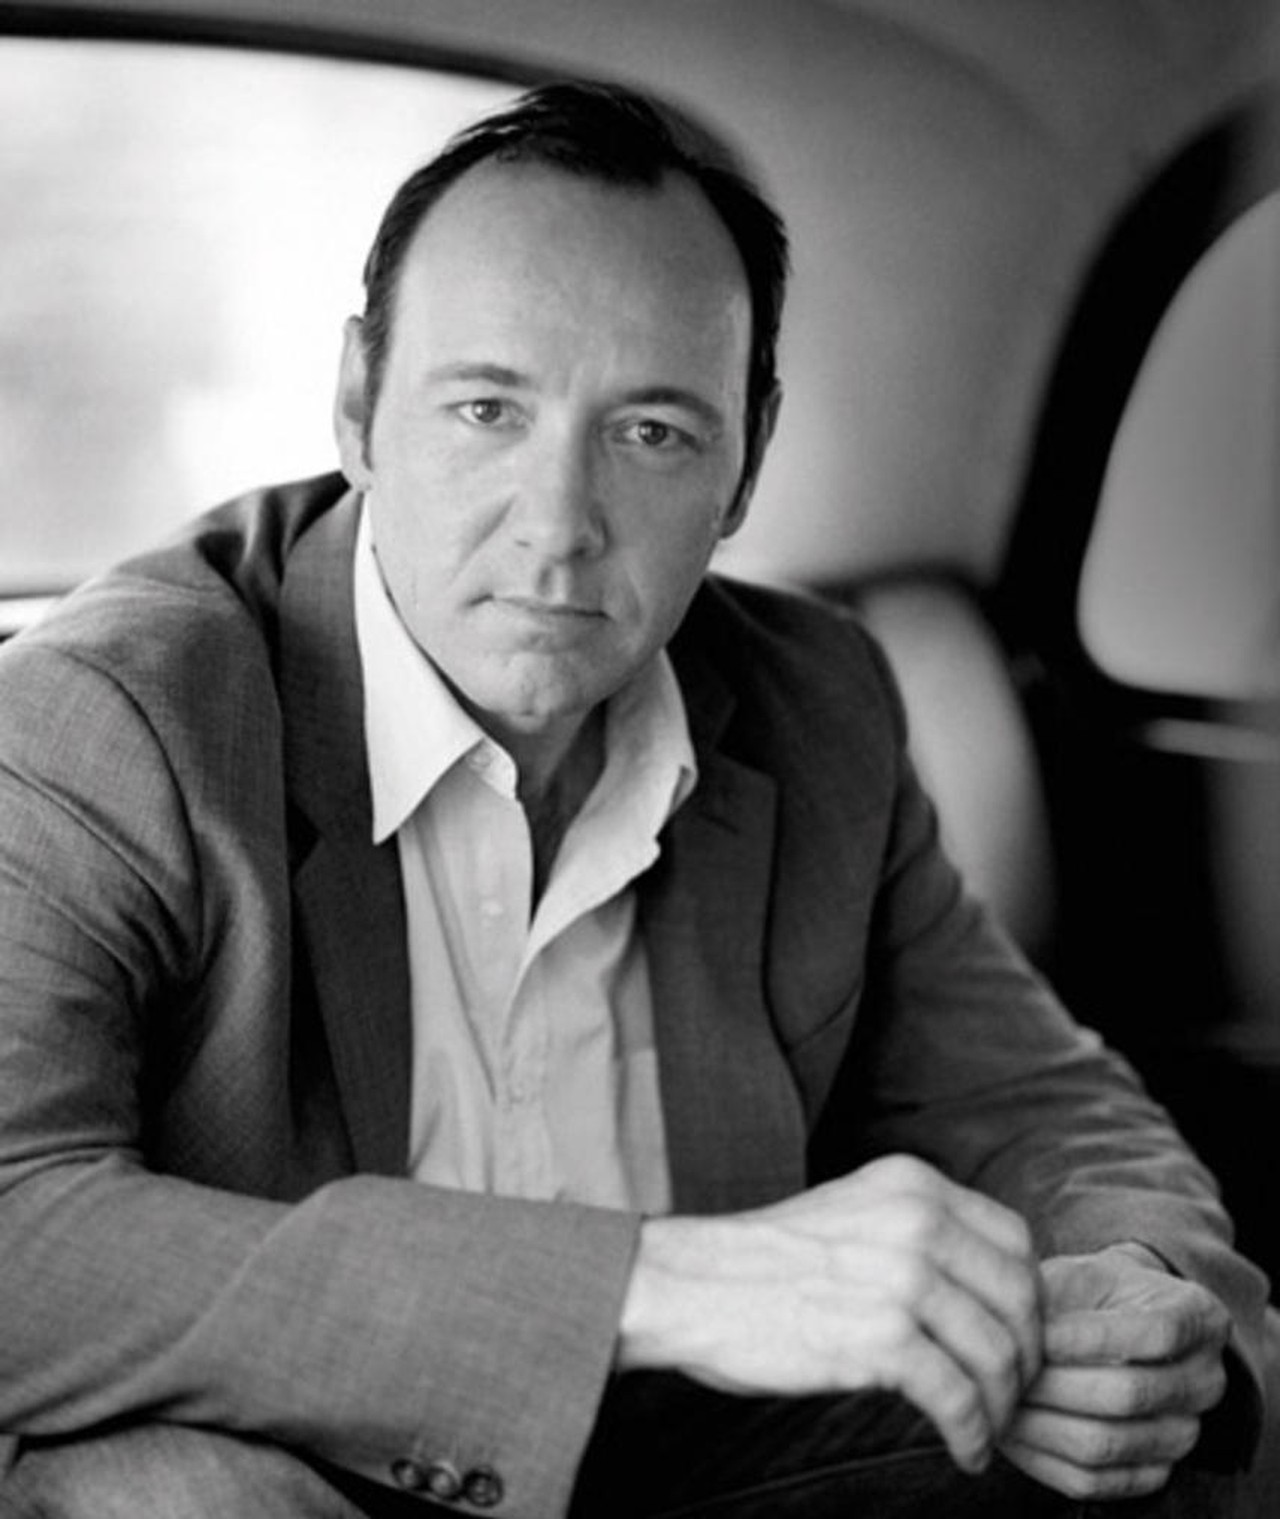 kevin spacey movies and tv shows 2021